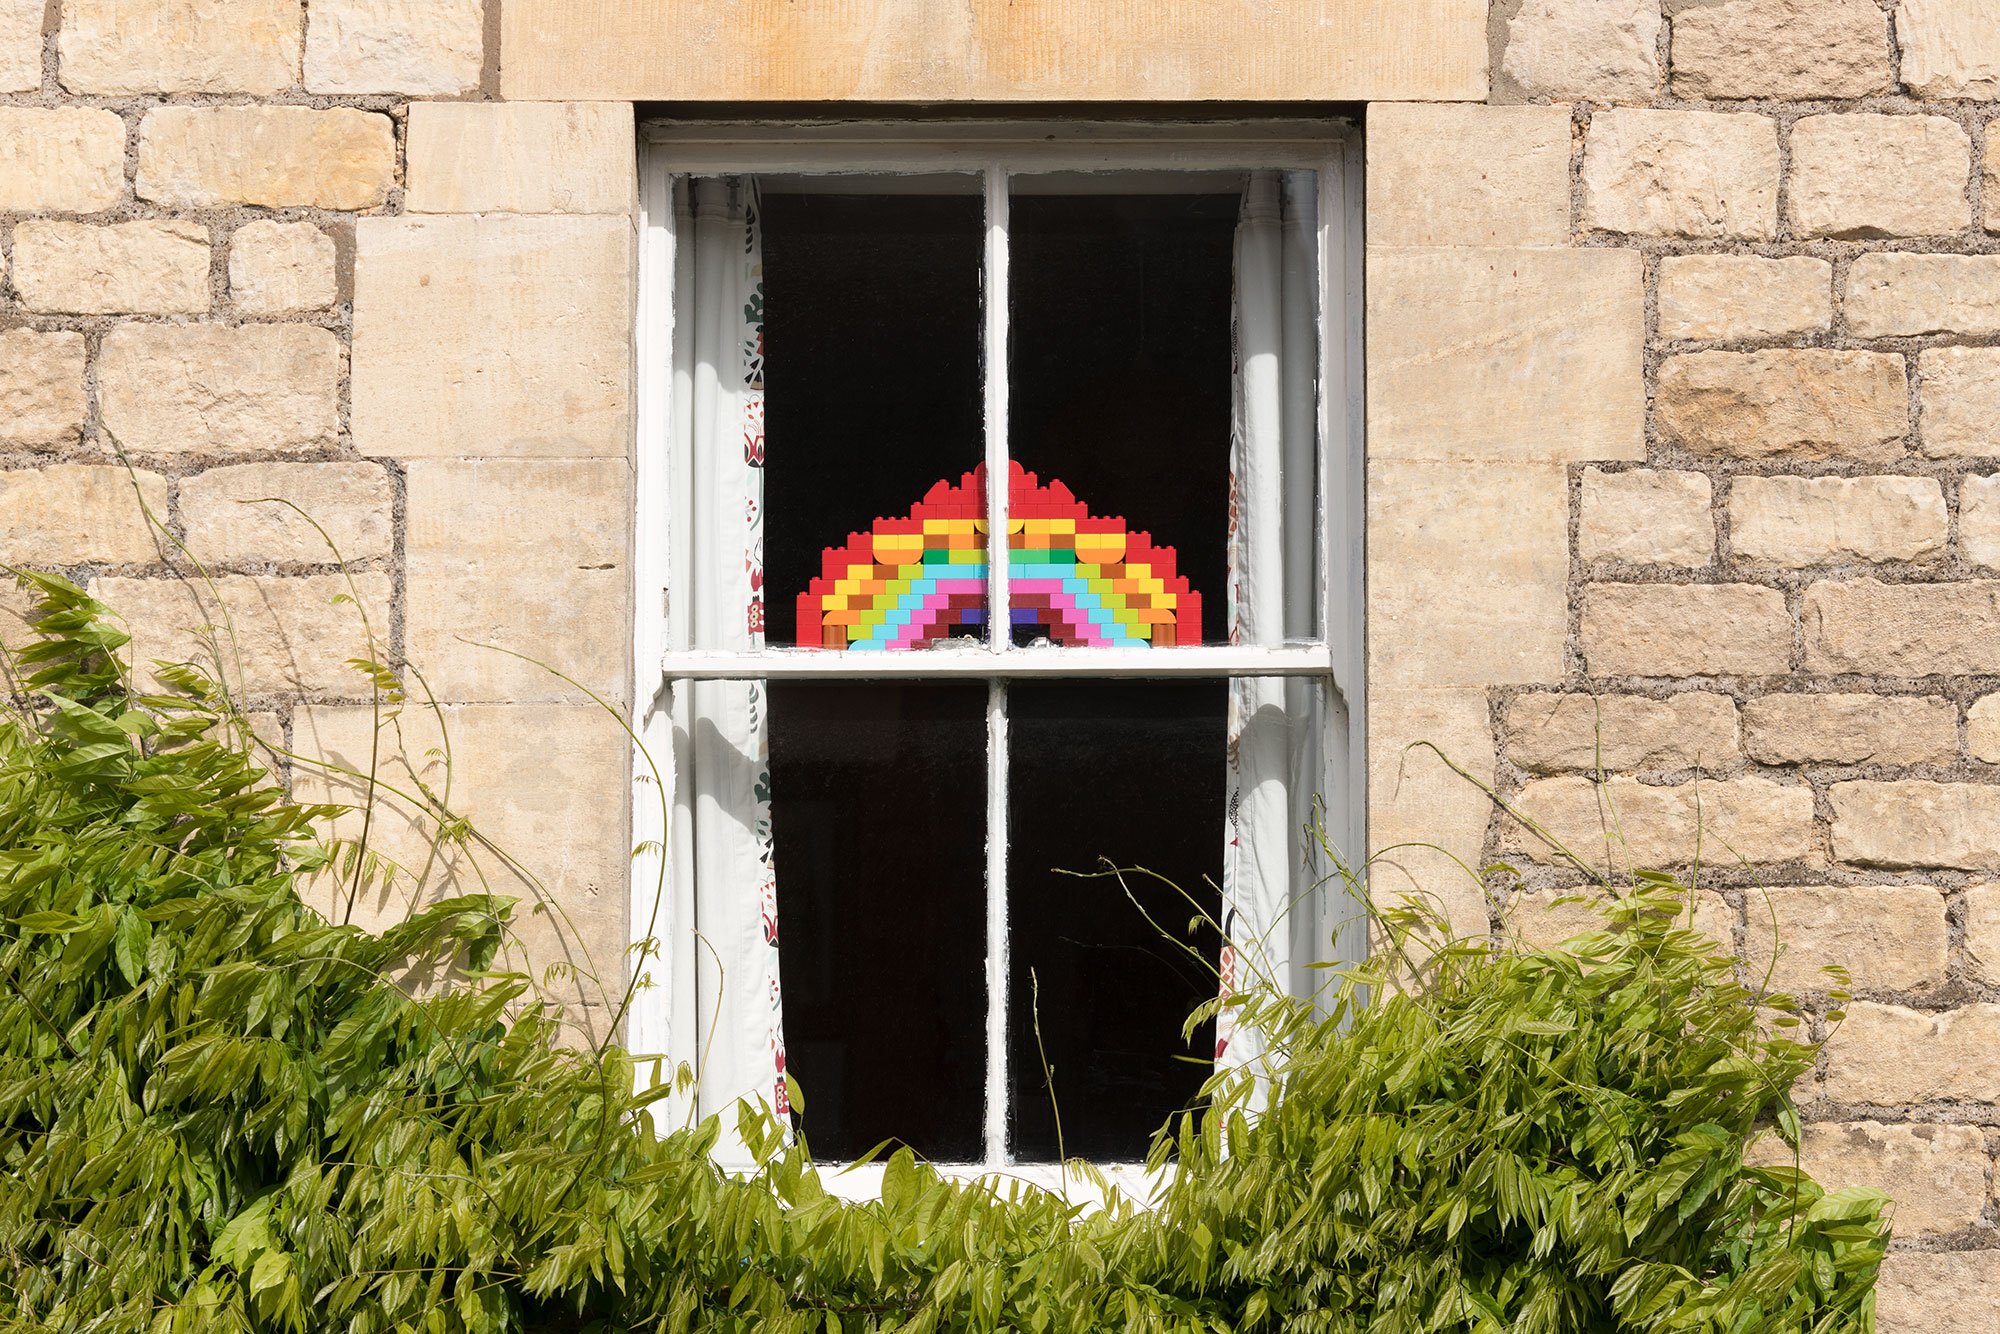 Photograph shows a view from a street of a window in a Cotswold stone house, in which is placed a rainbow made of lego.